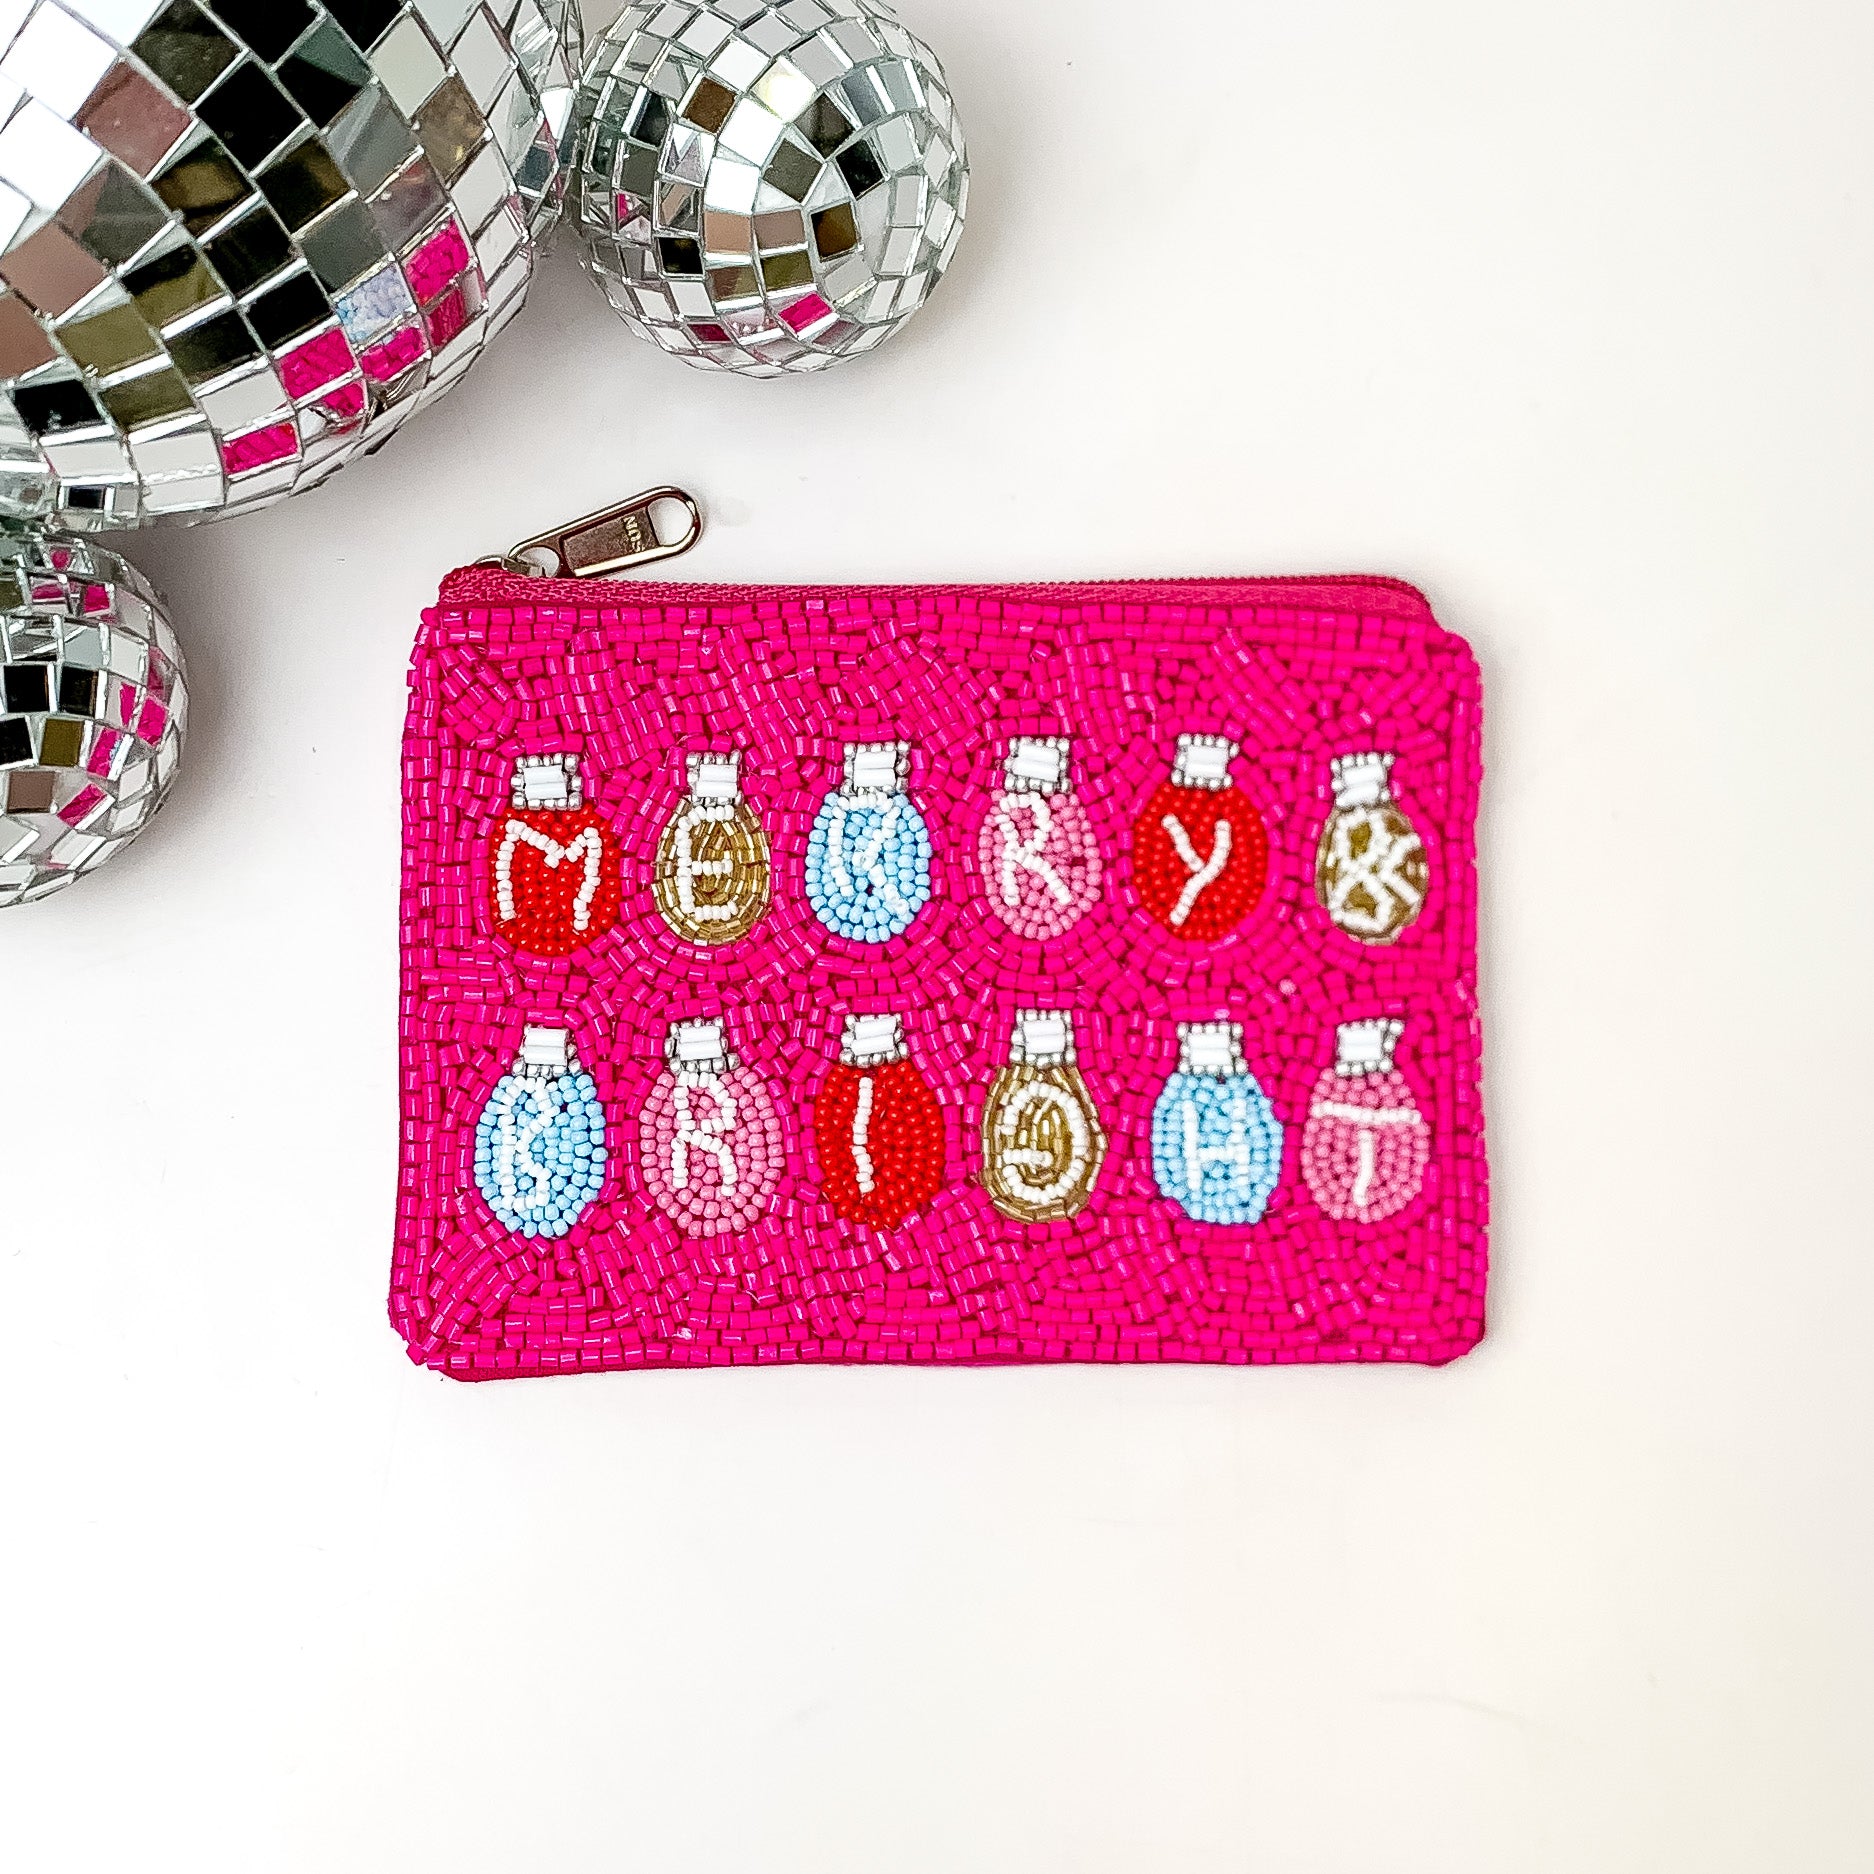 Fuchsia beaded coin purse with multicolored christmas lights. In each light there is a letter and the letters spell out MERRY & BRIGHT. This coin purse is pictured on a white background with disco balls in the top left corner. 